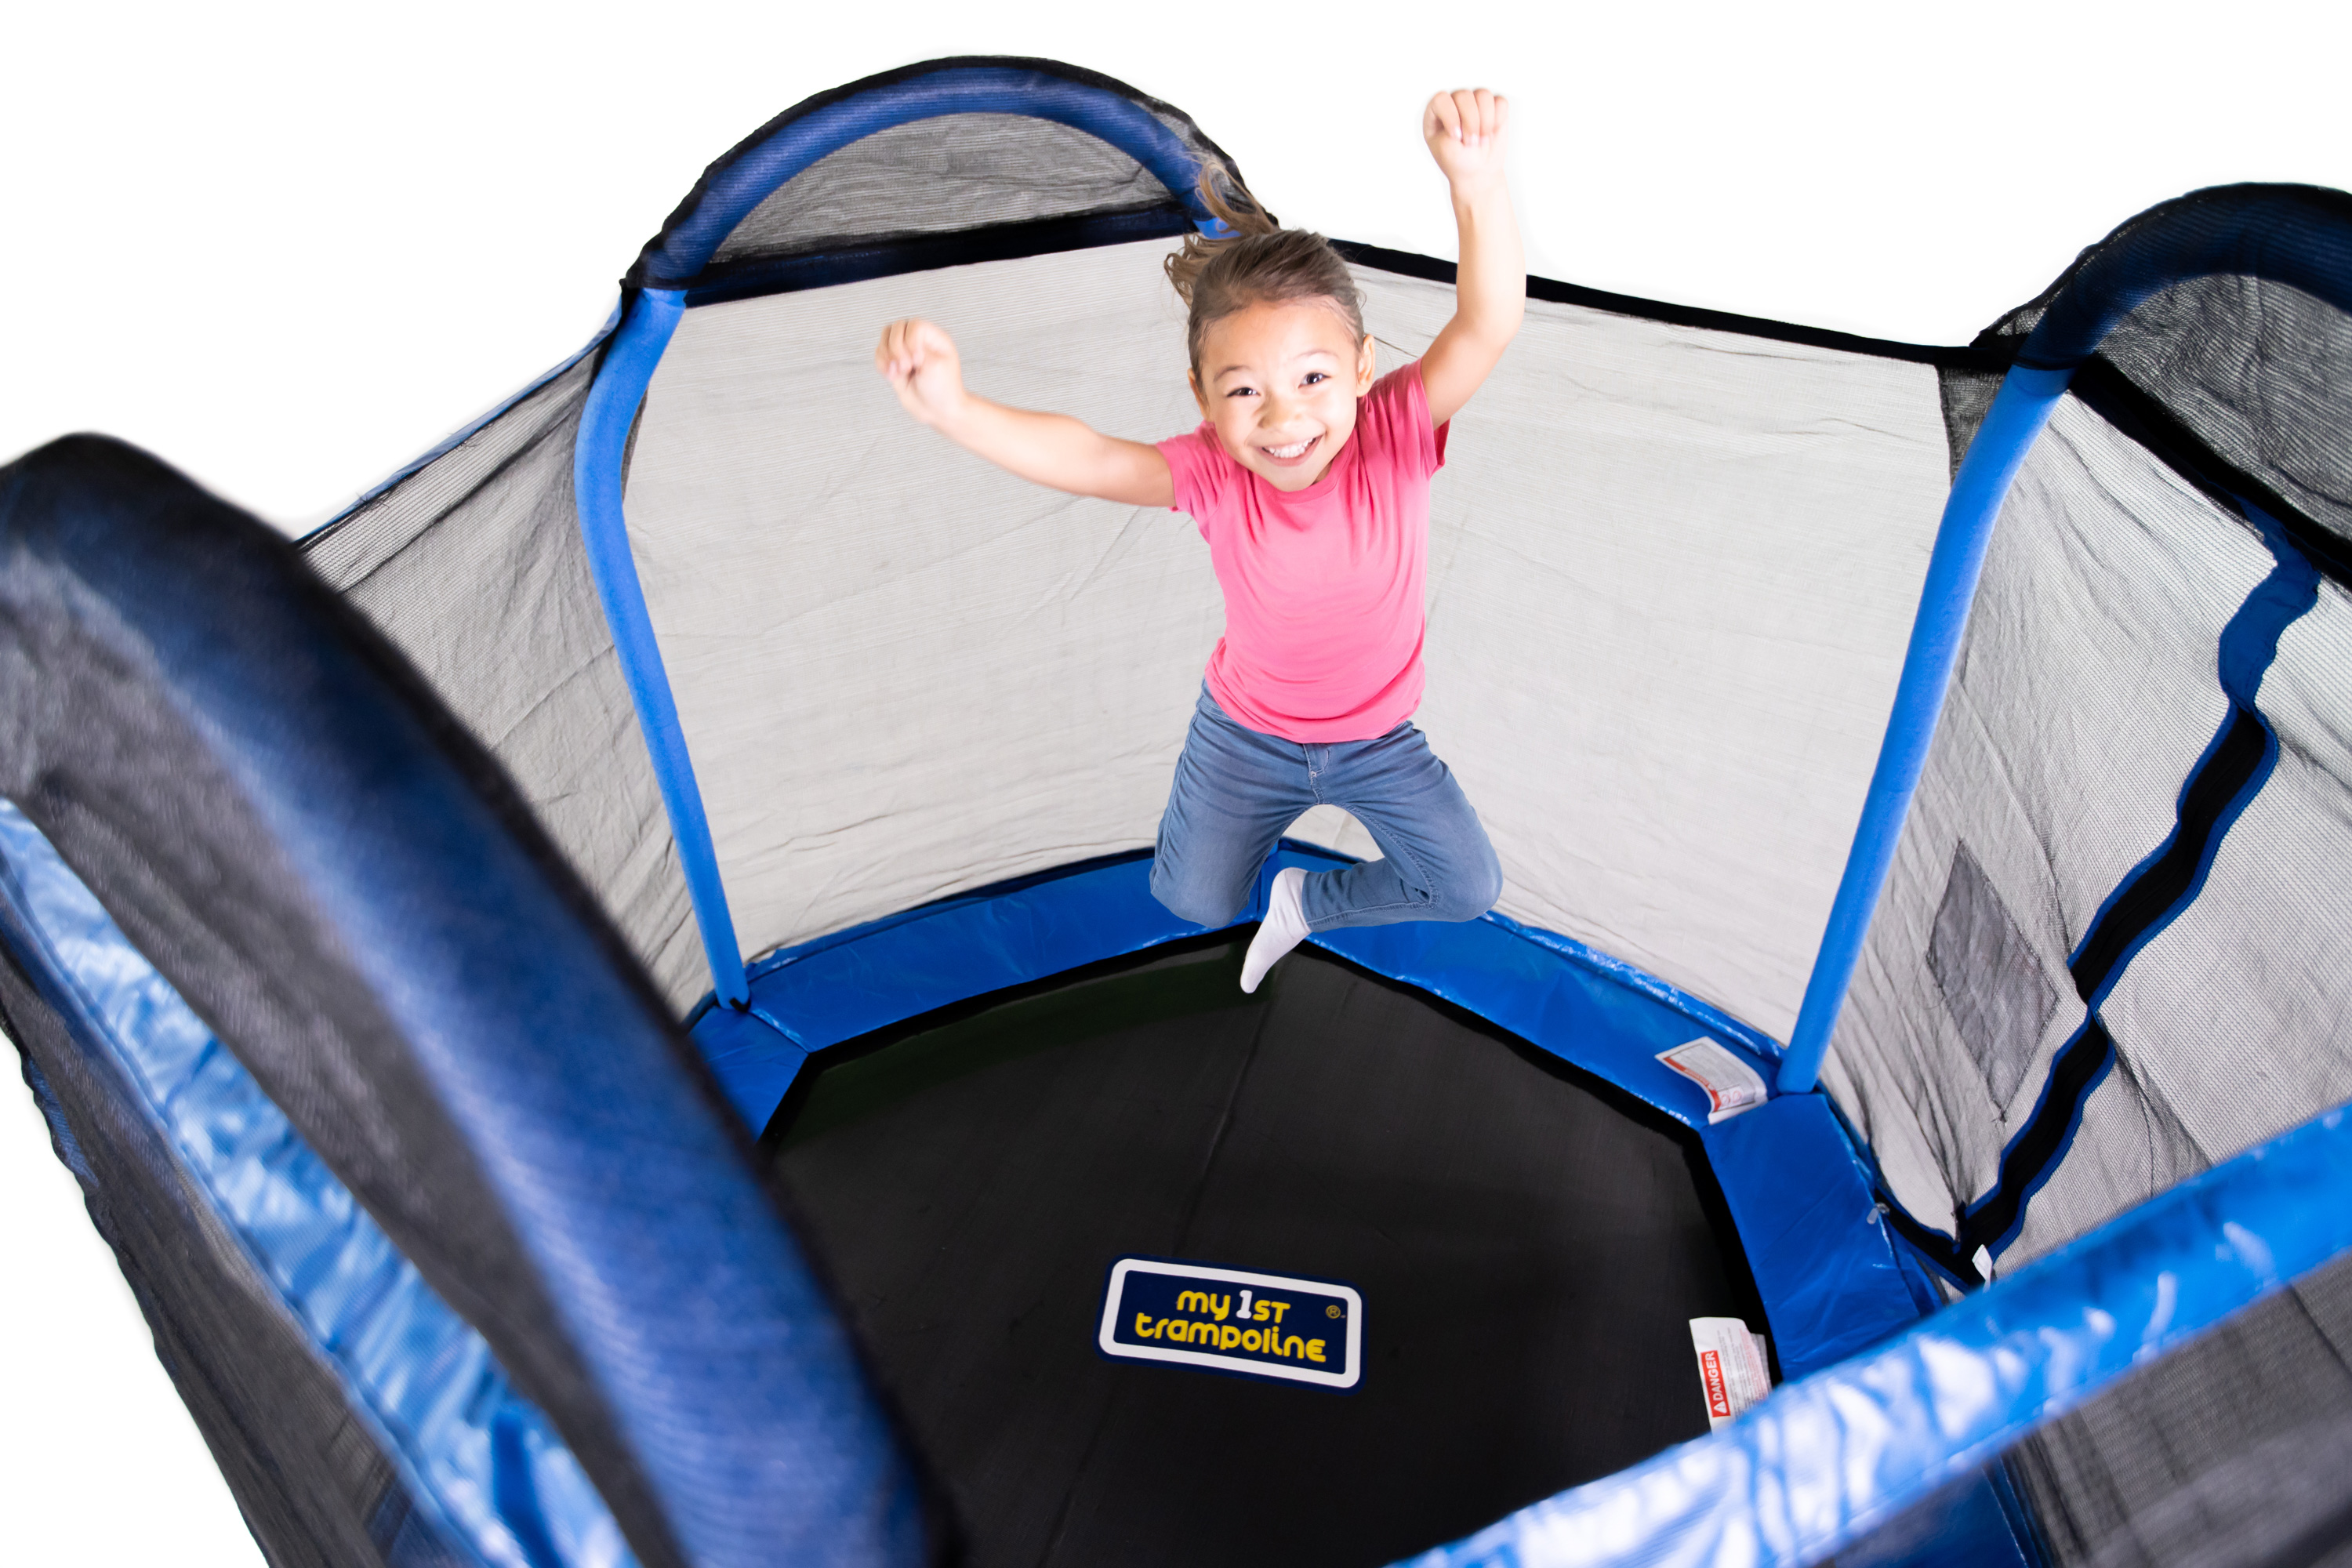 Bounce Pro 7-Foot My First Trampoline Hexagon (Ages 3-10) for Kids, Blue/Green - image 8 of 9